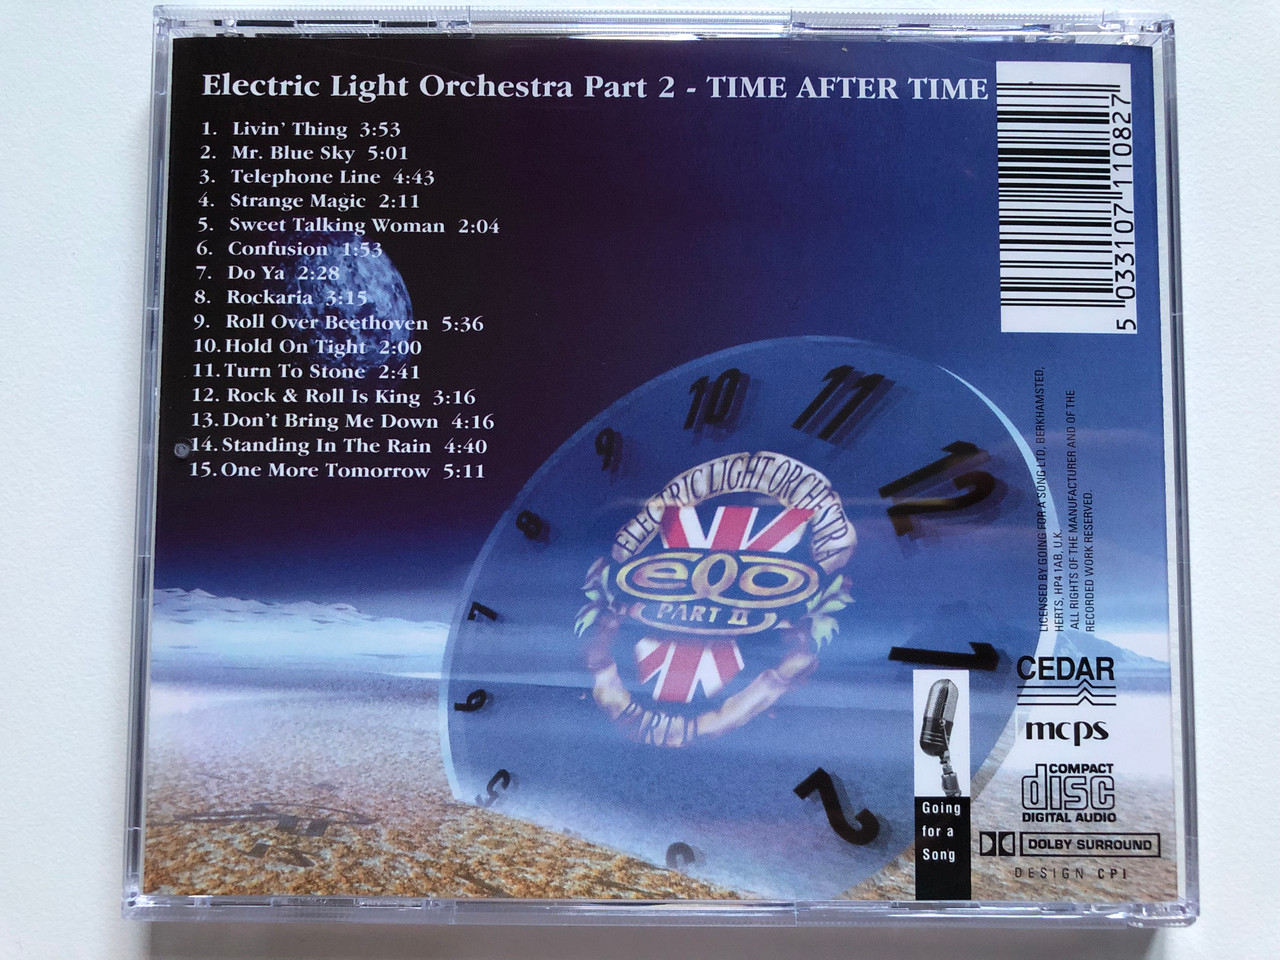 https://cdn10.bigcommerce.com/s-62bdpkt7pb/products/0/images/228496/Electric_Light_Orchestra_Part_2_Time_After_Time_Their_greatest_hits_recorded_live_and_in_Dolby_Surround_including_Hold_On_Tight_Mr._Blue_Sky_Dont_Bring_Me_Down_Strange_Magic_Going___72239.1653372603.1280.1280.JPG?c=2&_gl=1*18e7zzr*_ga*MjA2NTIxMjE2MC4xNTkwNTEyNTMy*_ga_WS2VZYPC6G*MTY1MzM3MTM3Ni40MDguMS4xNjUzMzcyMjEyLjM4